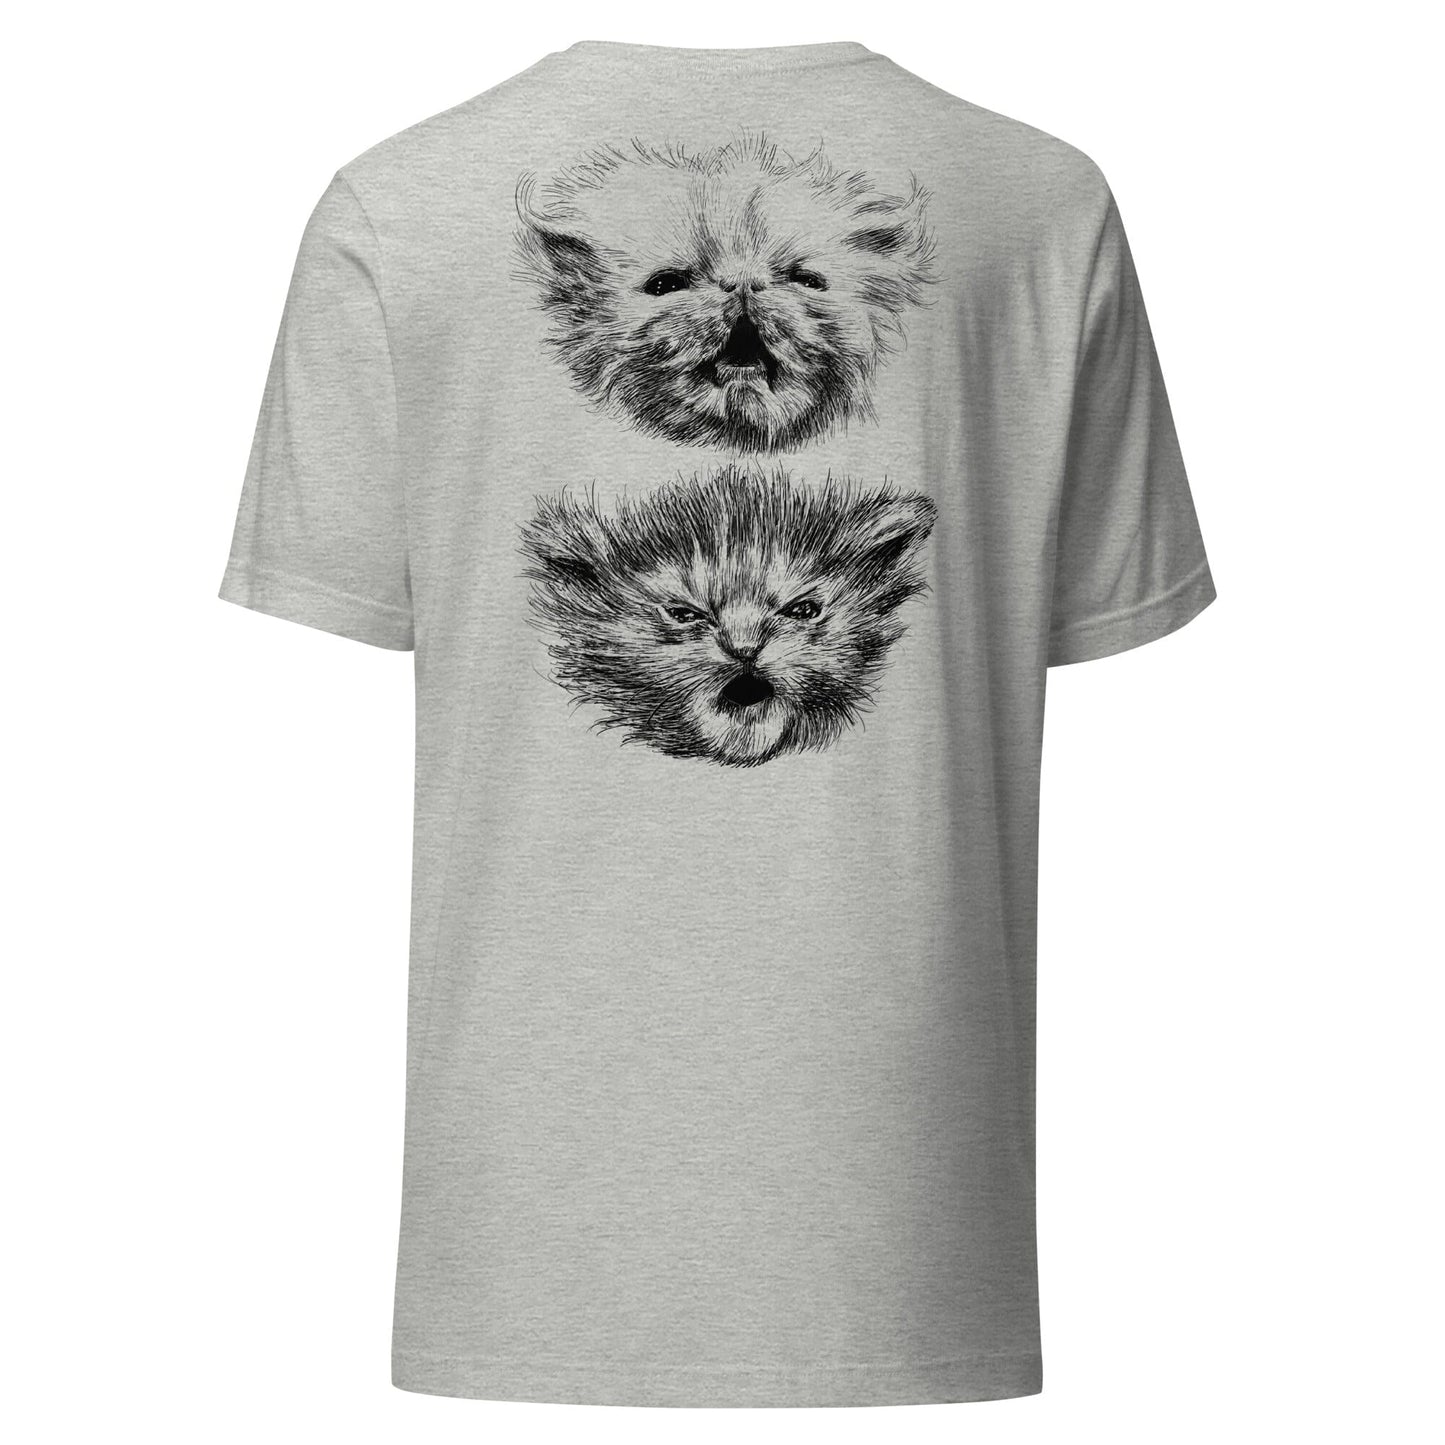 WispTot T-Shirt (Extended Sizing) [Unfoiled] (All net proceeds go to equally to Kitty CrusAIDe and Rags to Riches Animal Rescue) JoyousJoyfulJoyness 